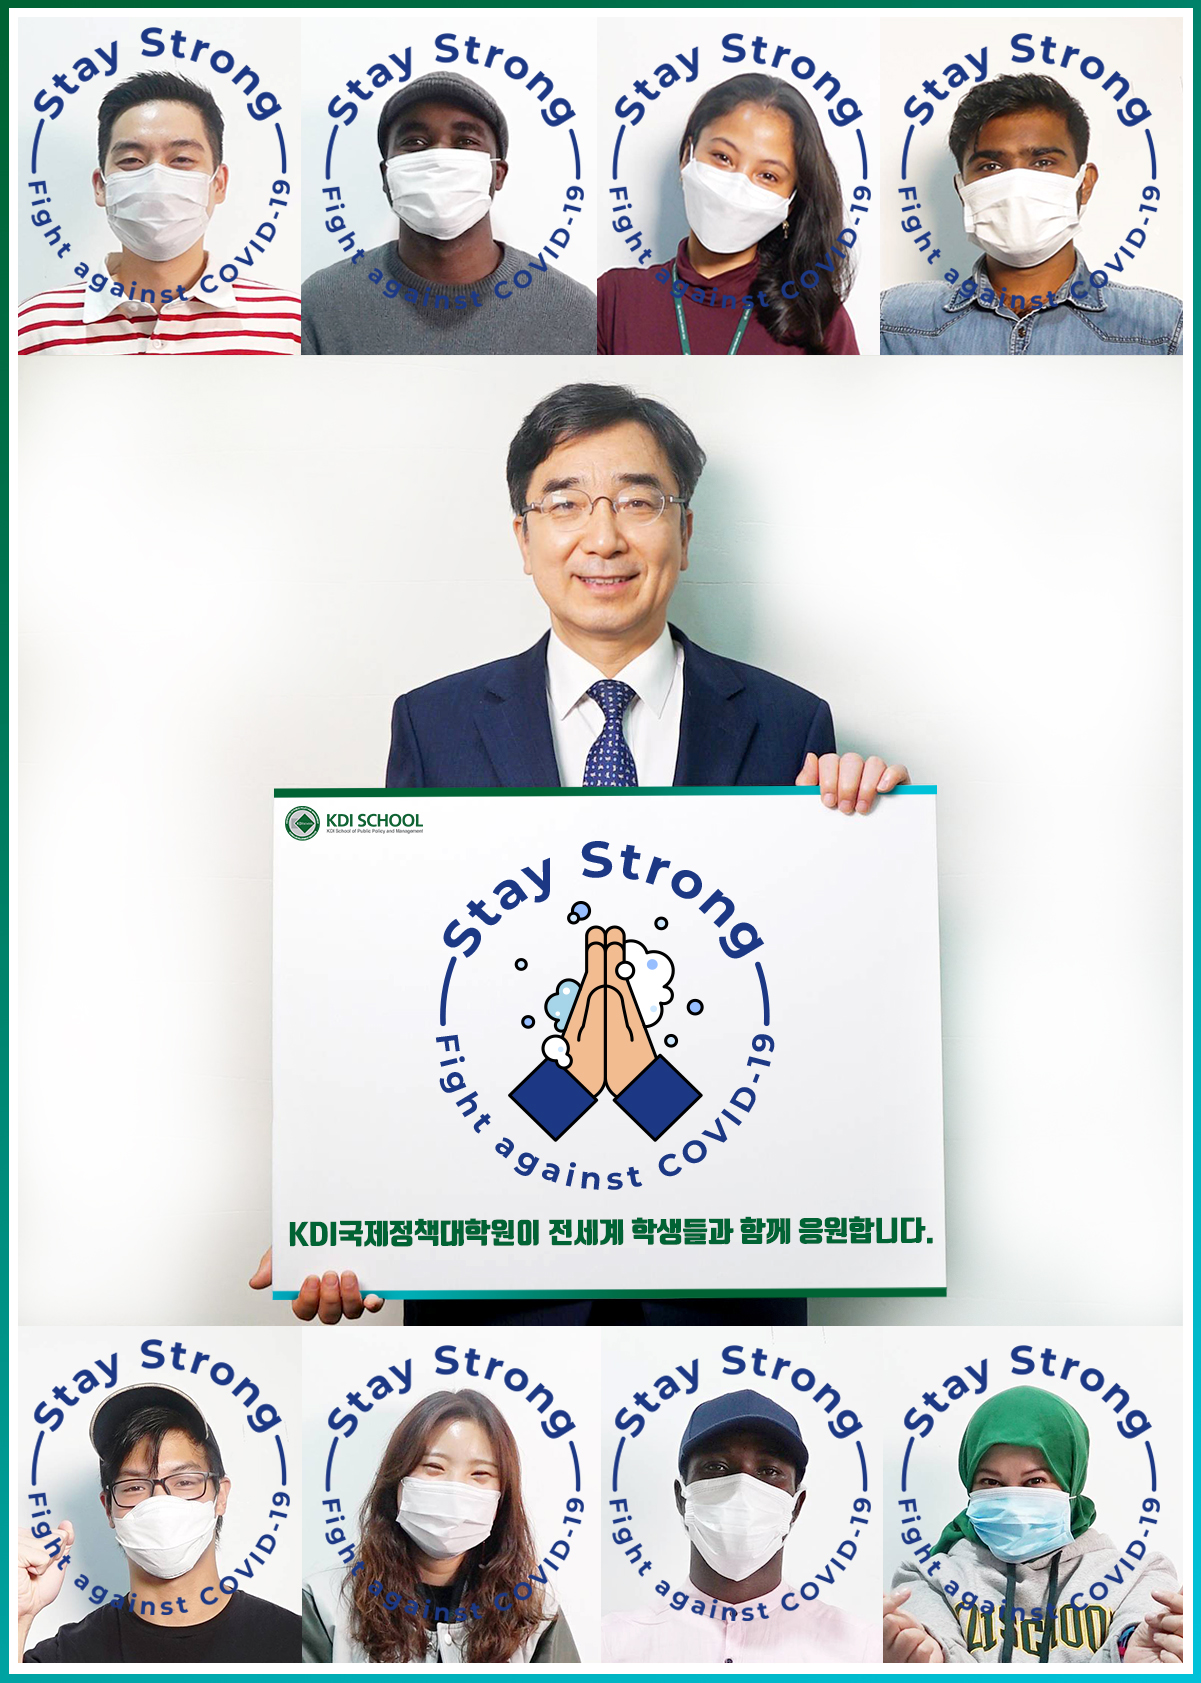 Dean Jong-Il You Participated Stay Strong Campaign